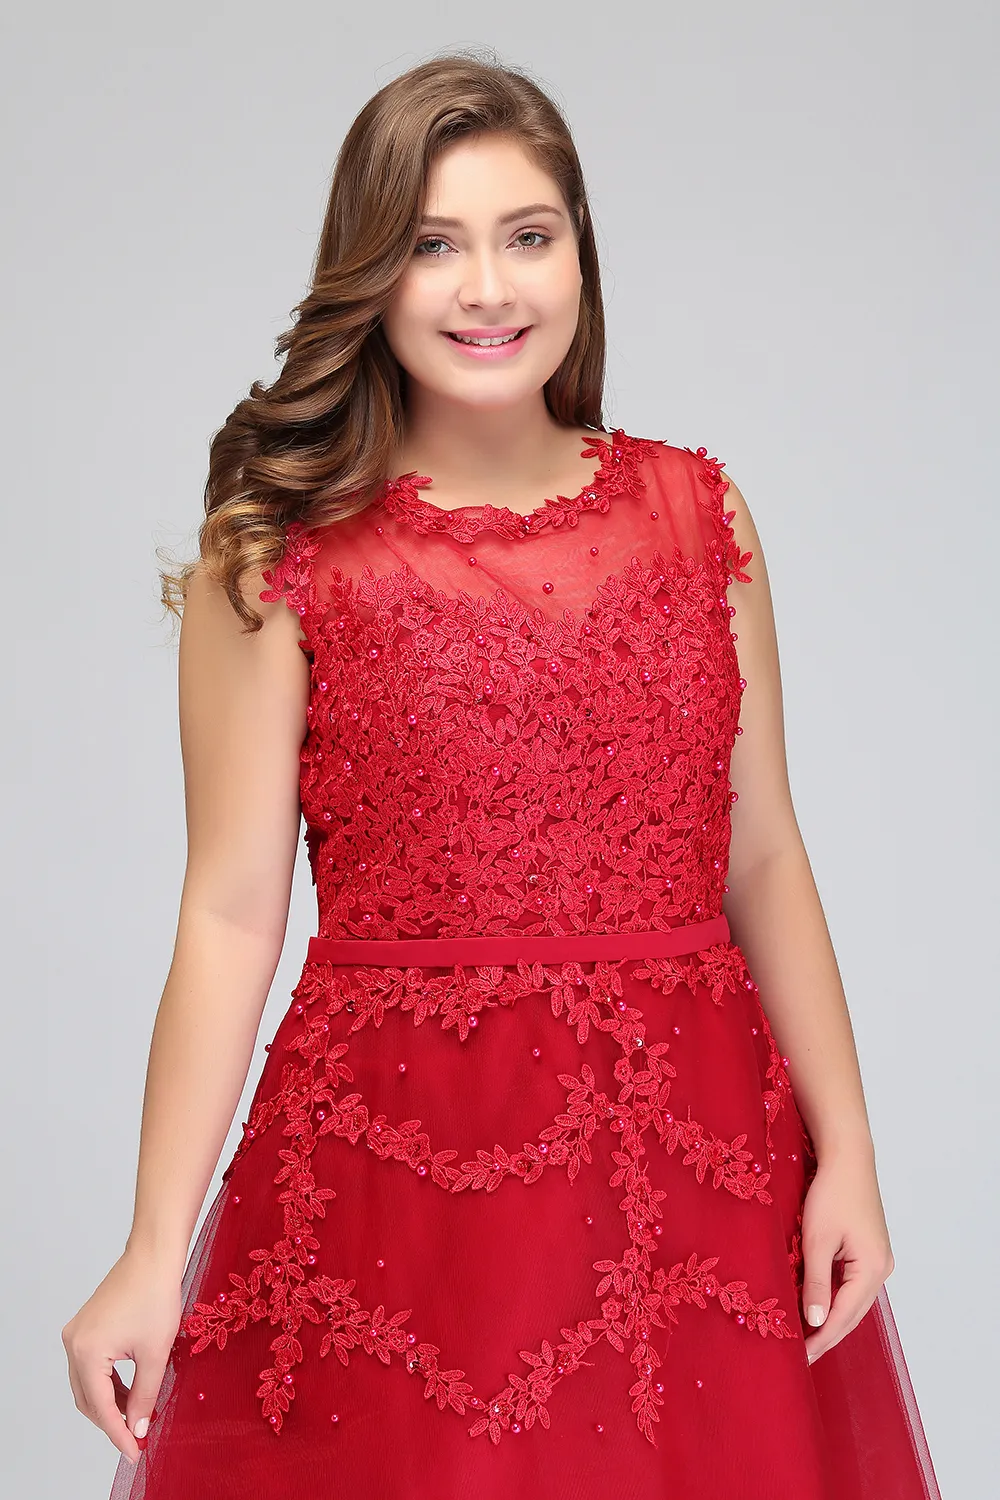 Real Image Plus Size Red Lace Short Cocktail Dresses Tulle Lace Beaded Knee Length A Line Formal Party Evening Dresses CPS298